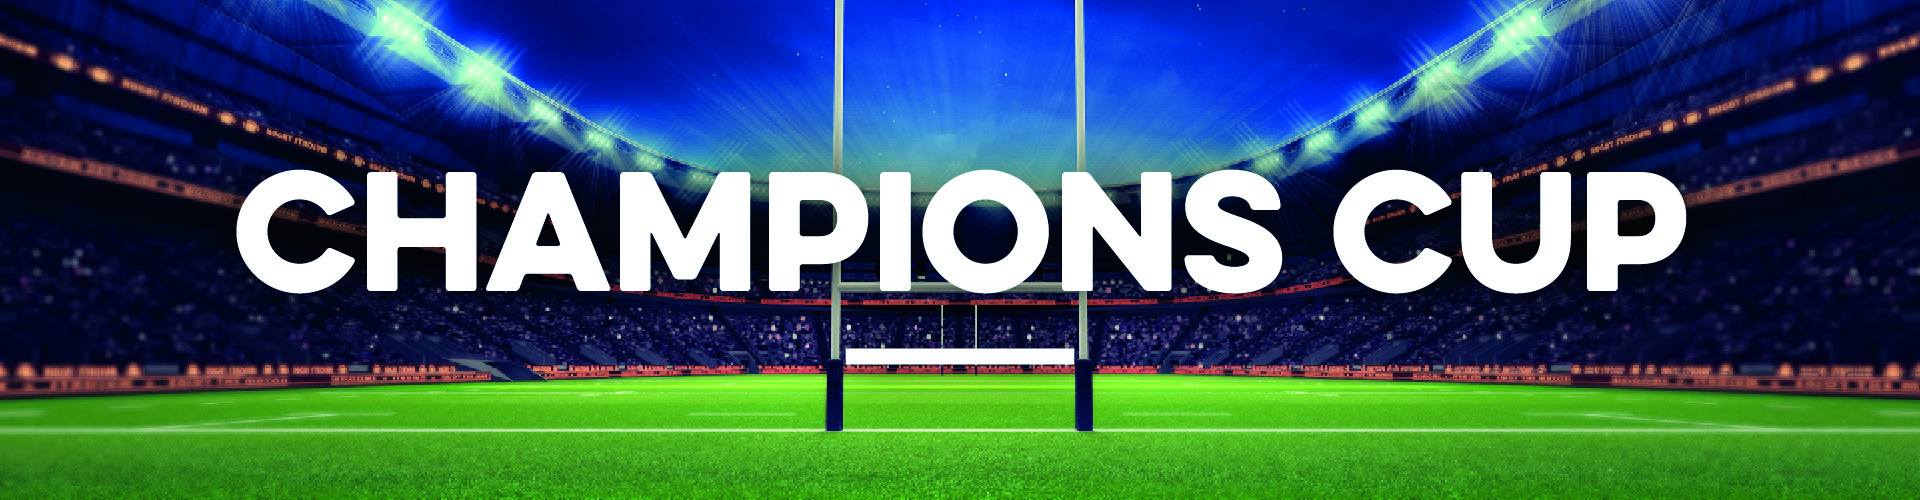 Watch Champions Cup at your local pub